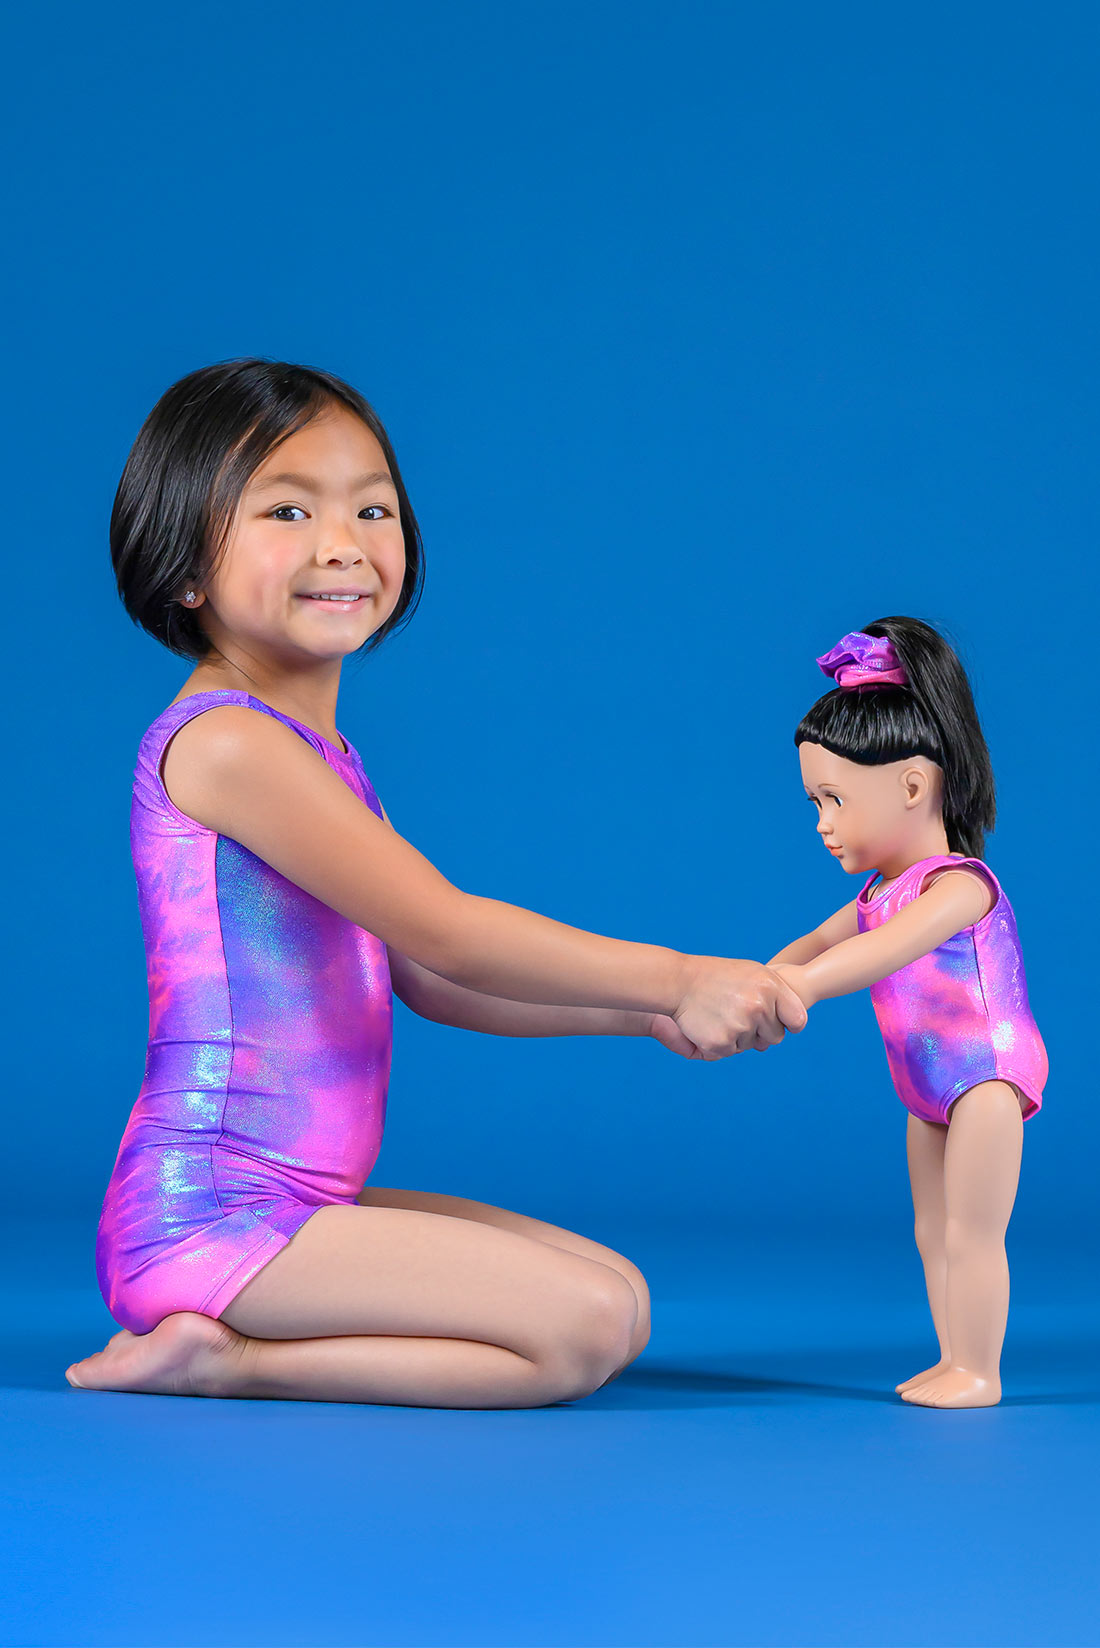 A toddler girl wearing a gymnastics unitard and holding hands with a doll wearing a matching pink and purple leotard by Destira, 2023